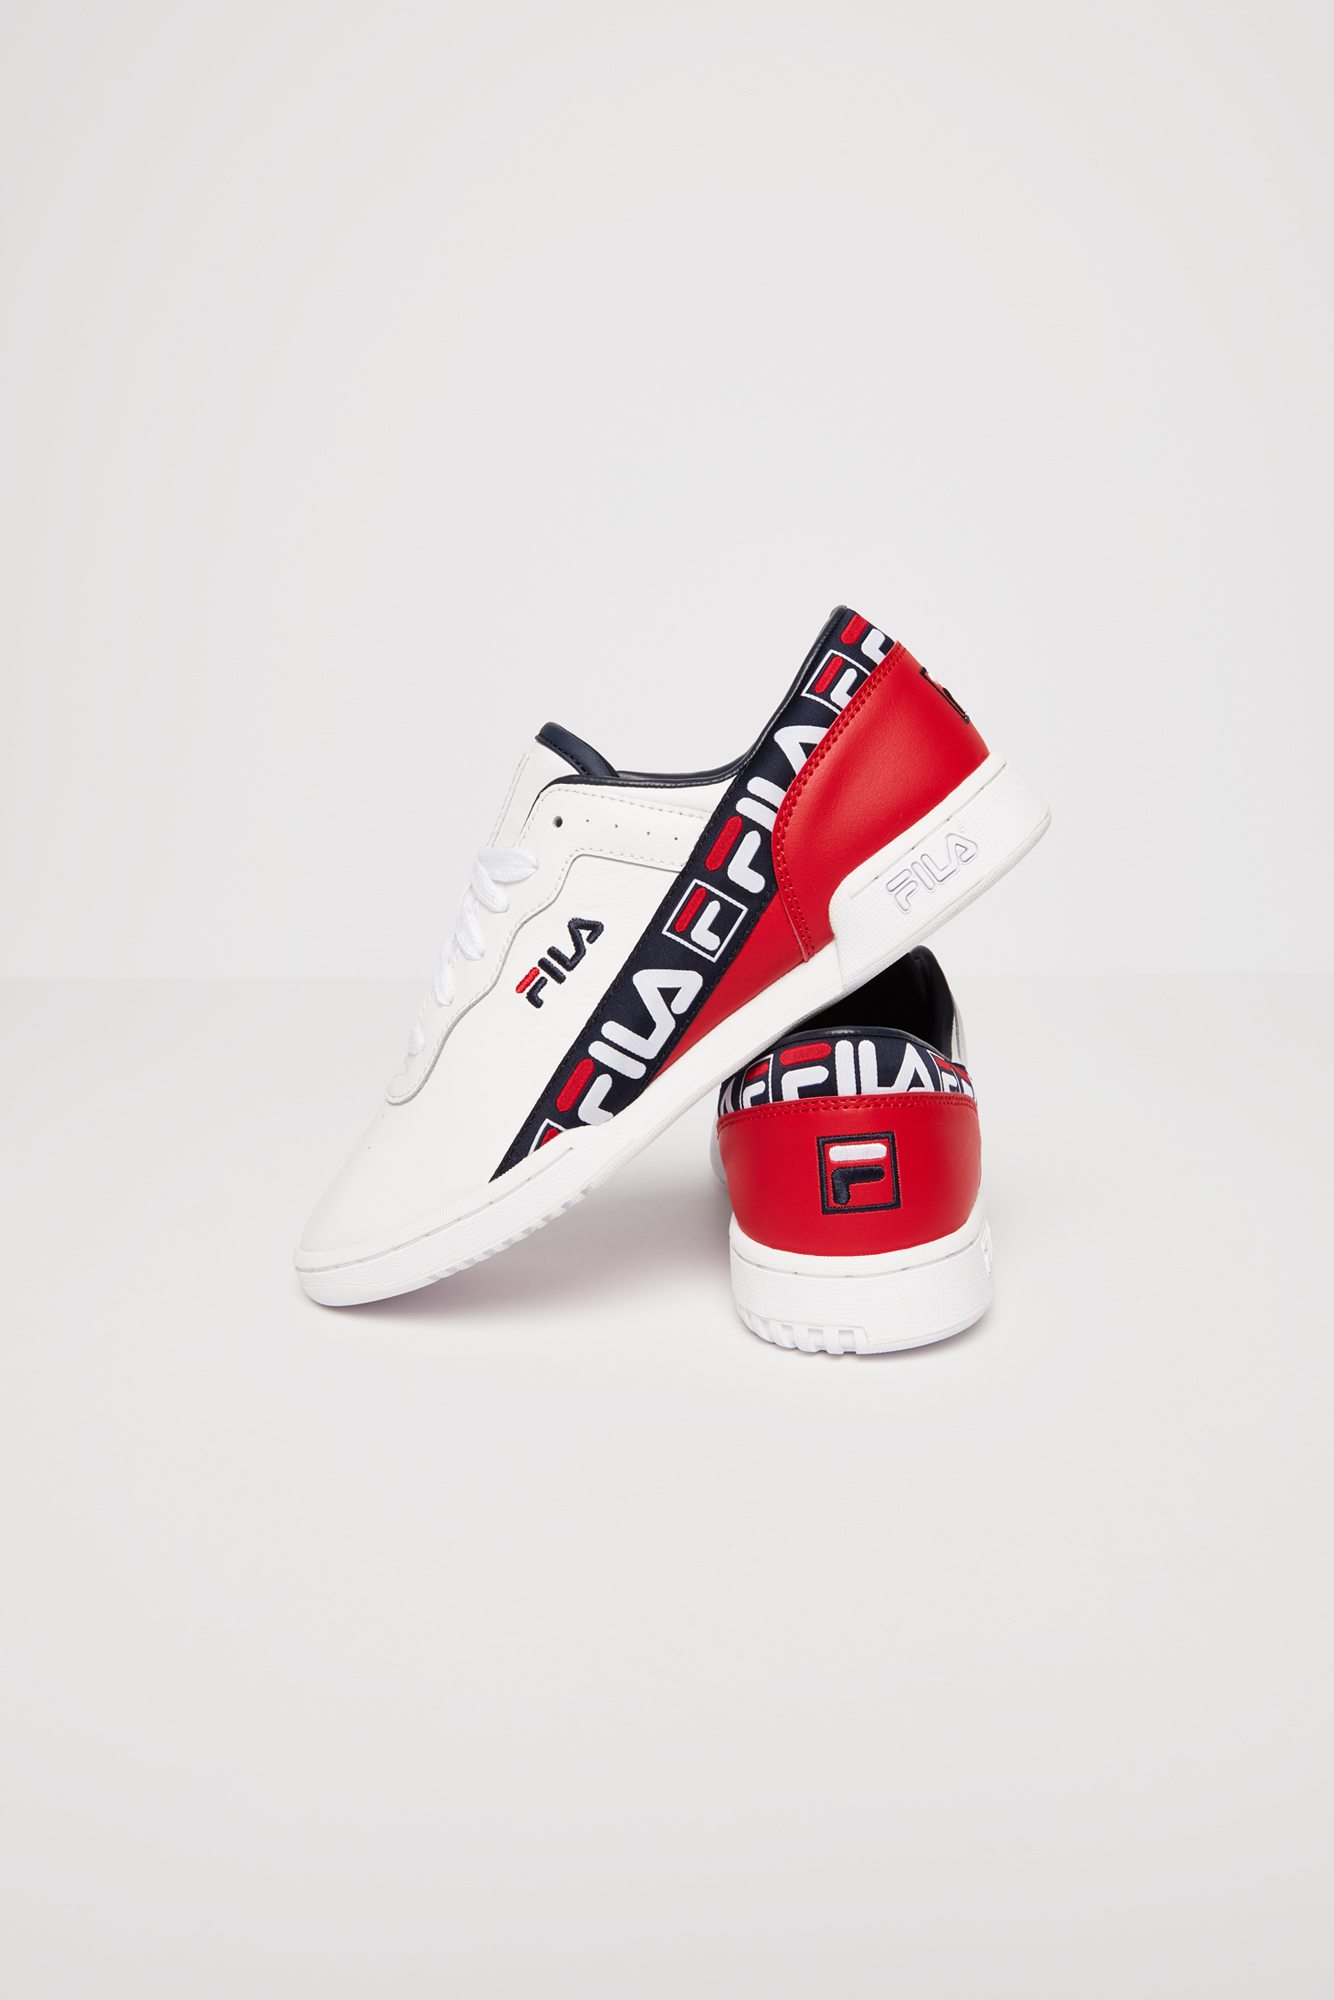 Fila Drops Two Builds of the Women's 